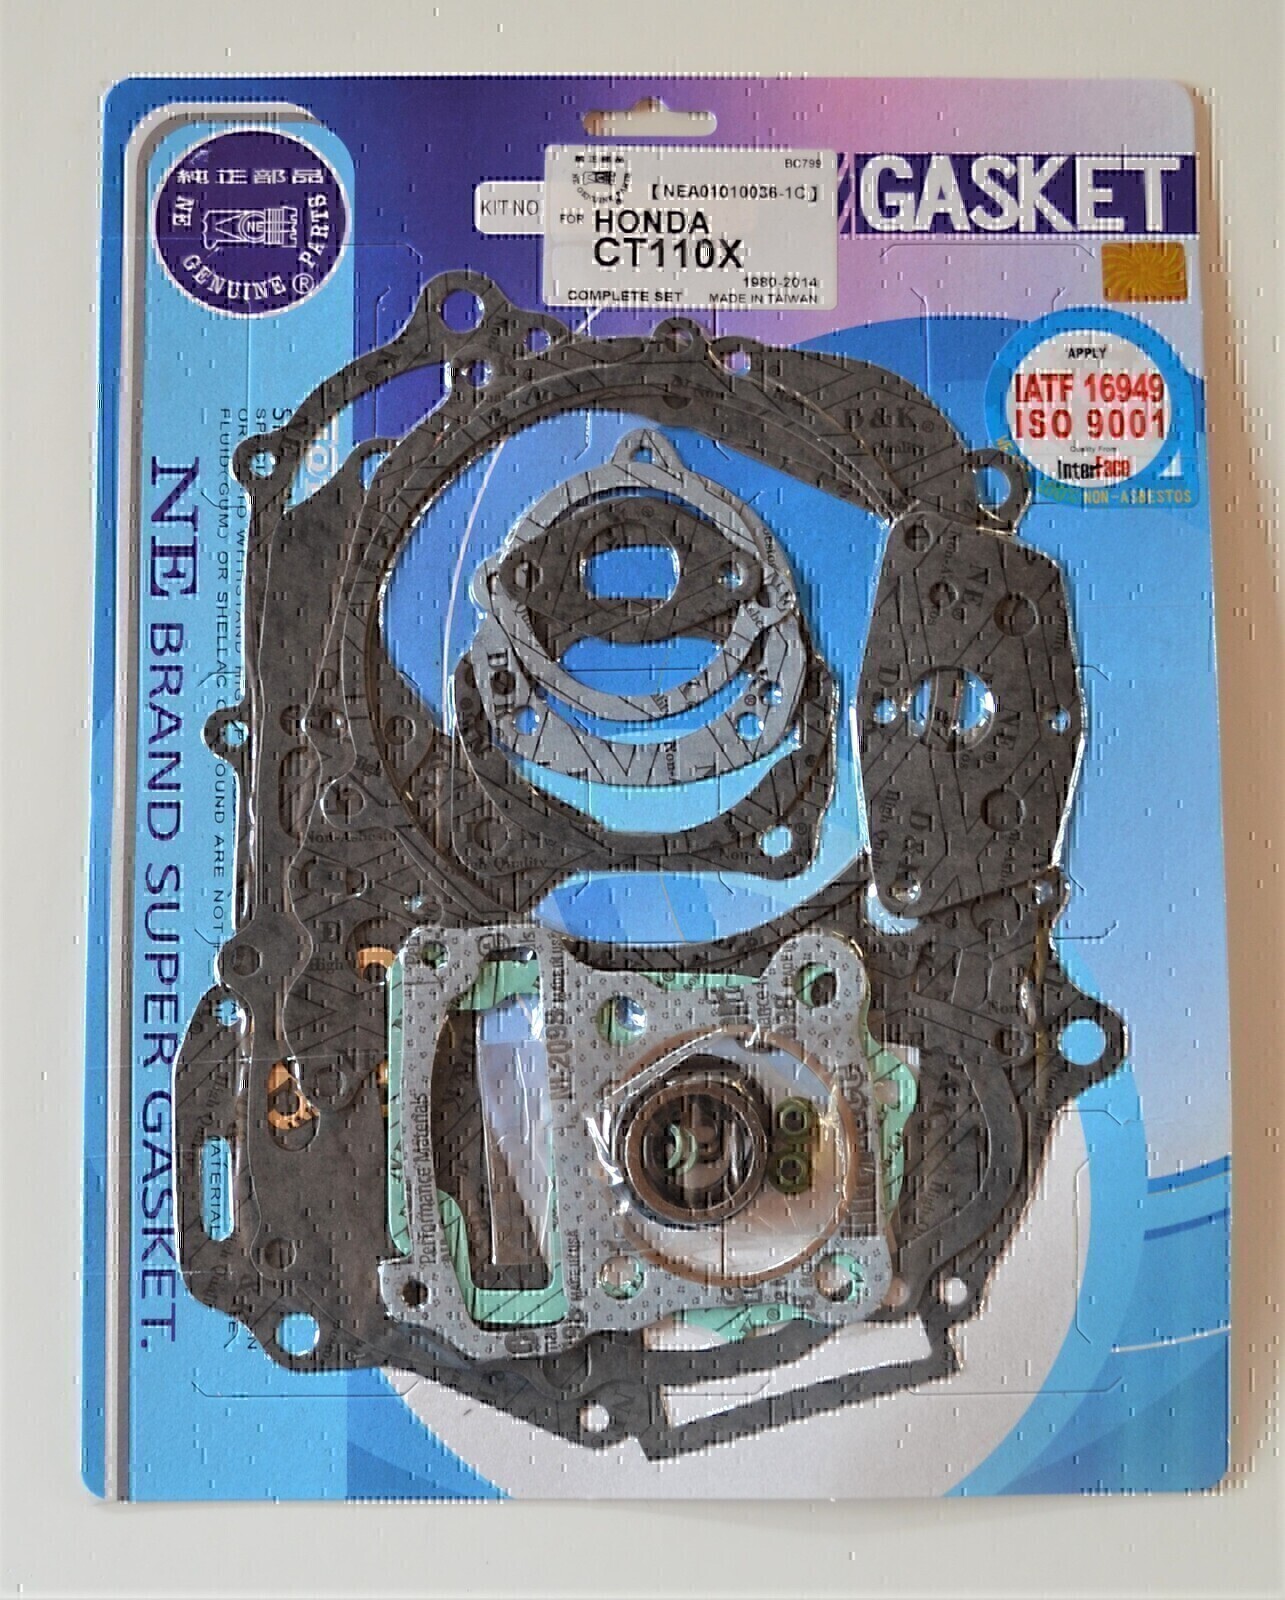 COMPLETE GASKET KIT FOR HONDA CT110 CT 110 CT110X CT 110X 1980 - 2014